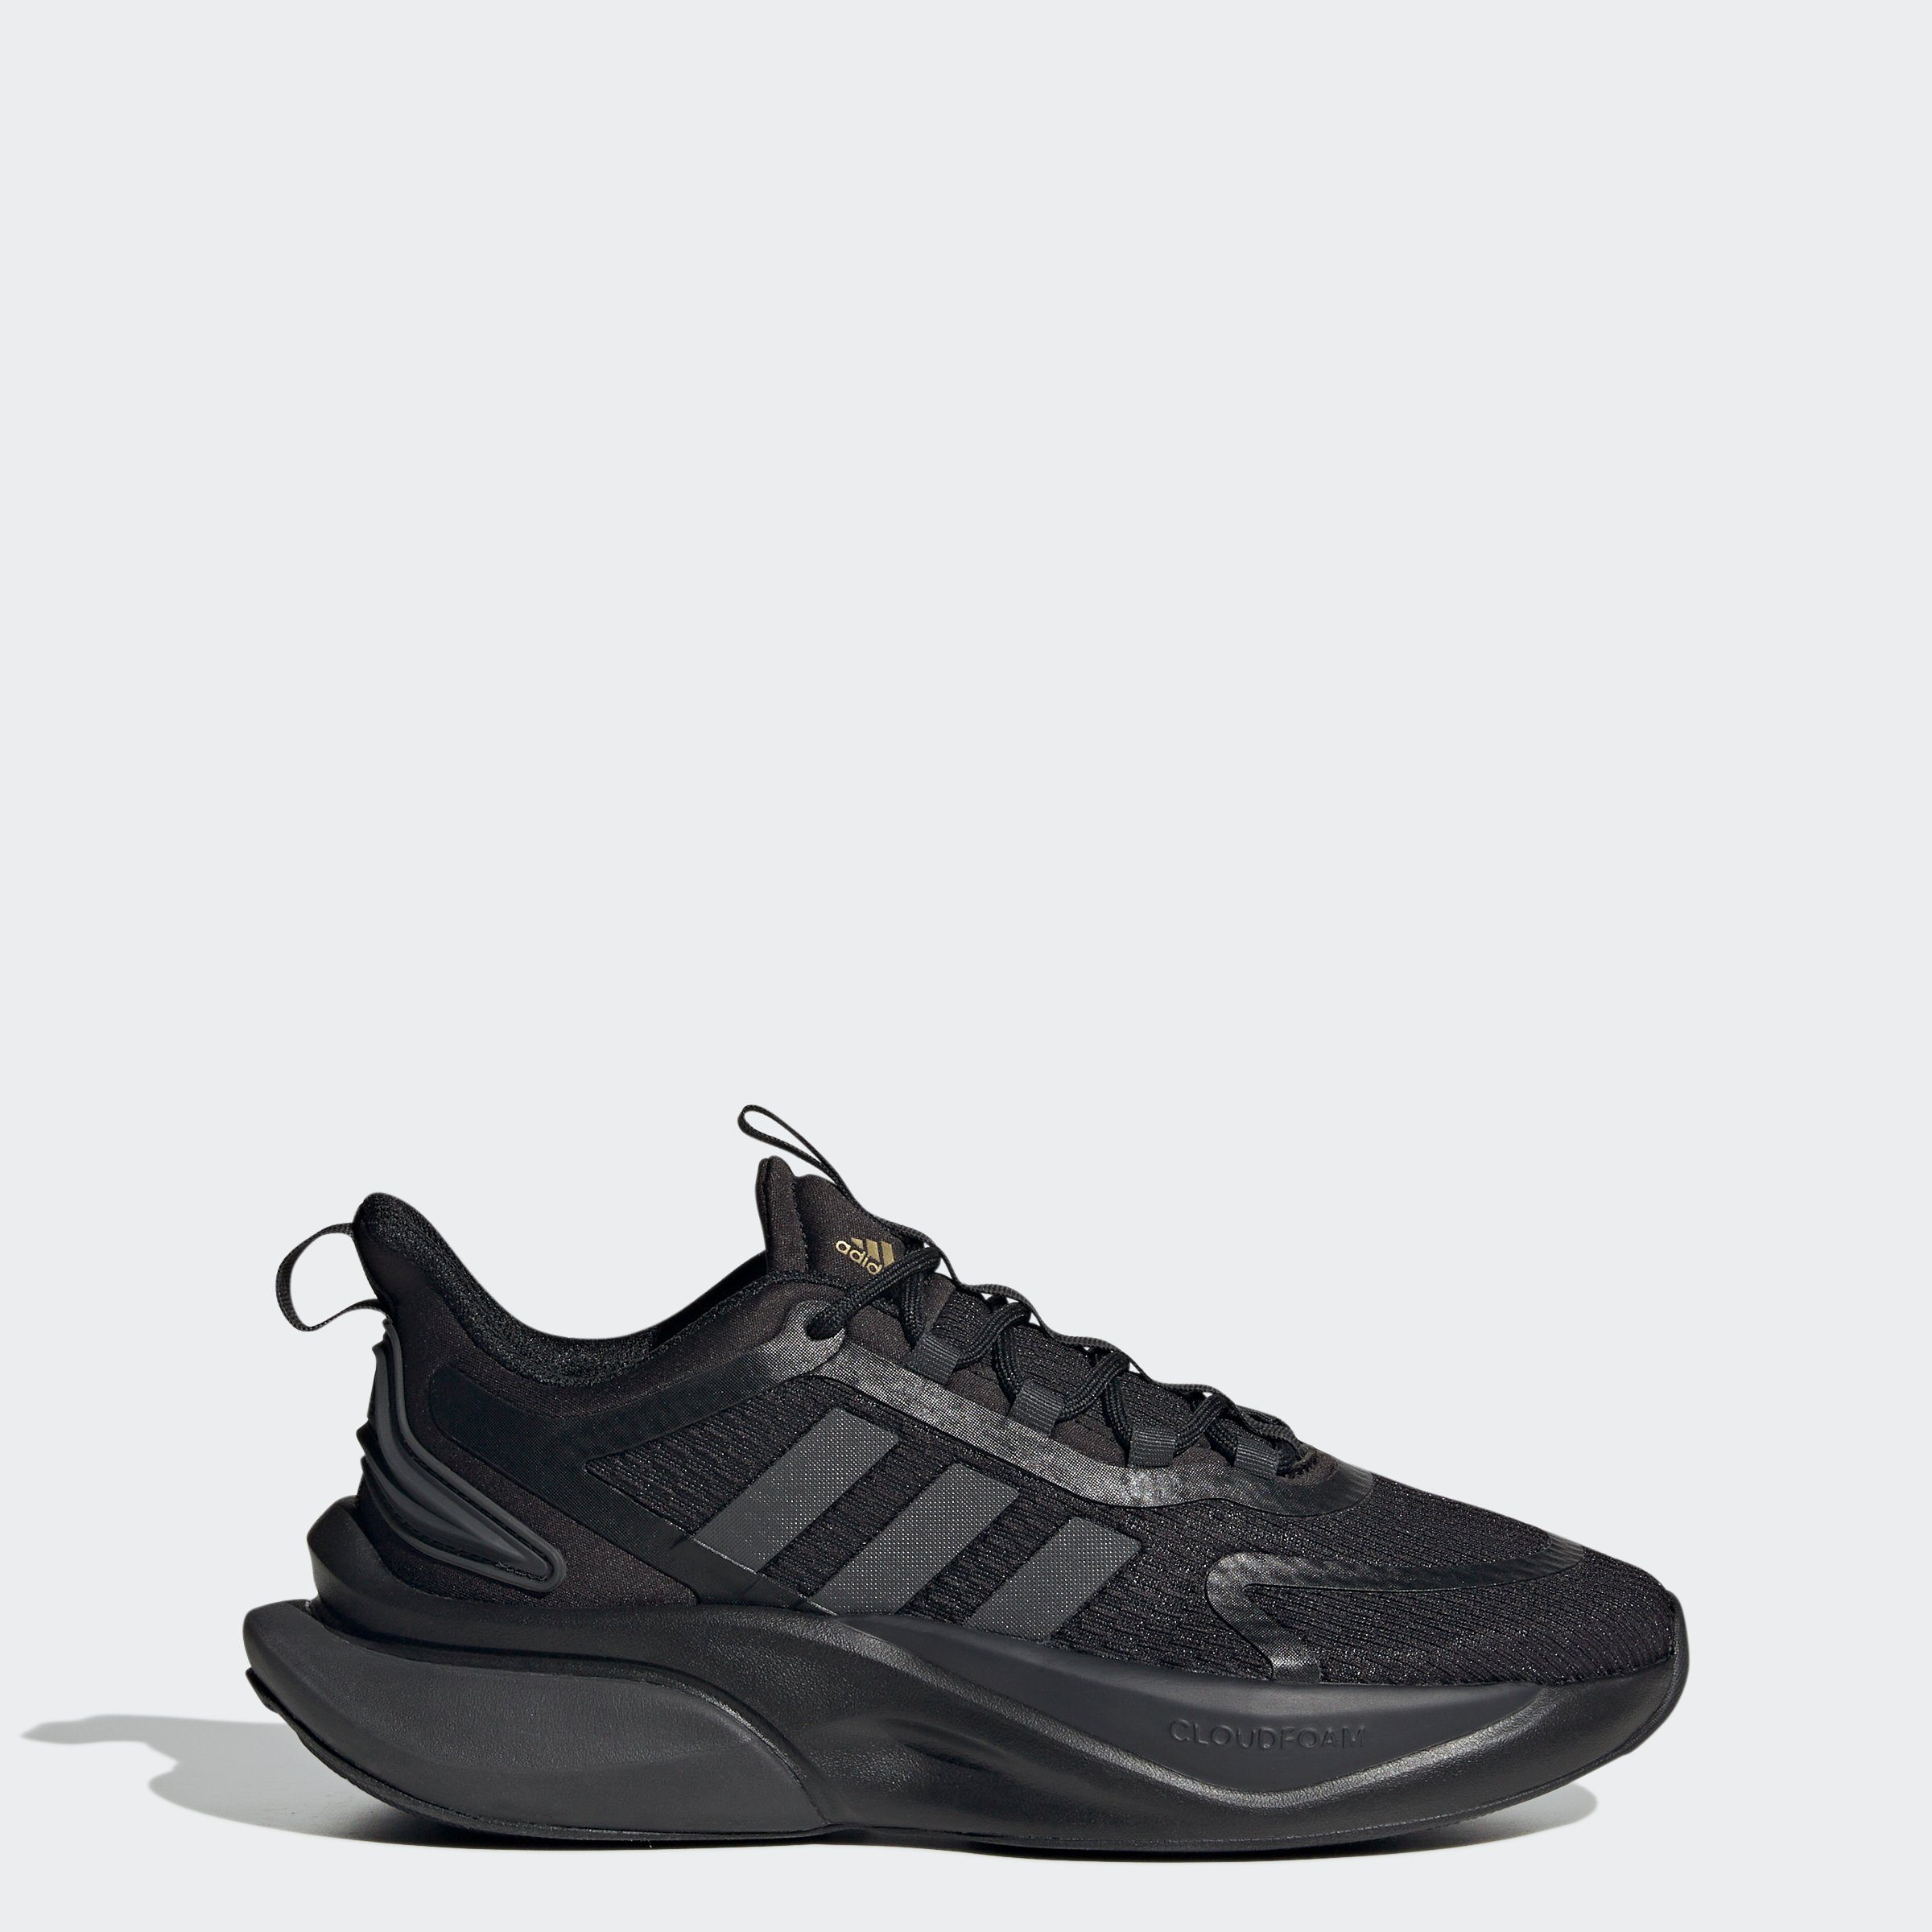 adidas Sportswear ALPHABOUNCE+ / Metallic Gold Core Sneaker Carbon BOUNCE / Black SUSTAINABLE